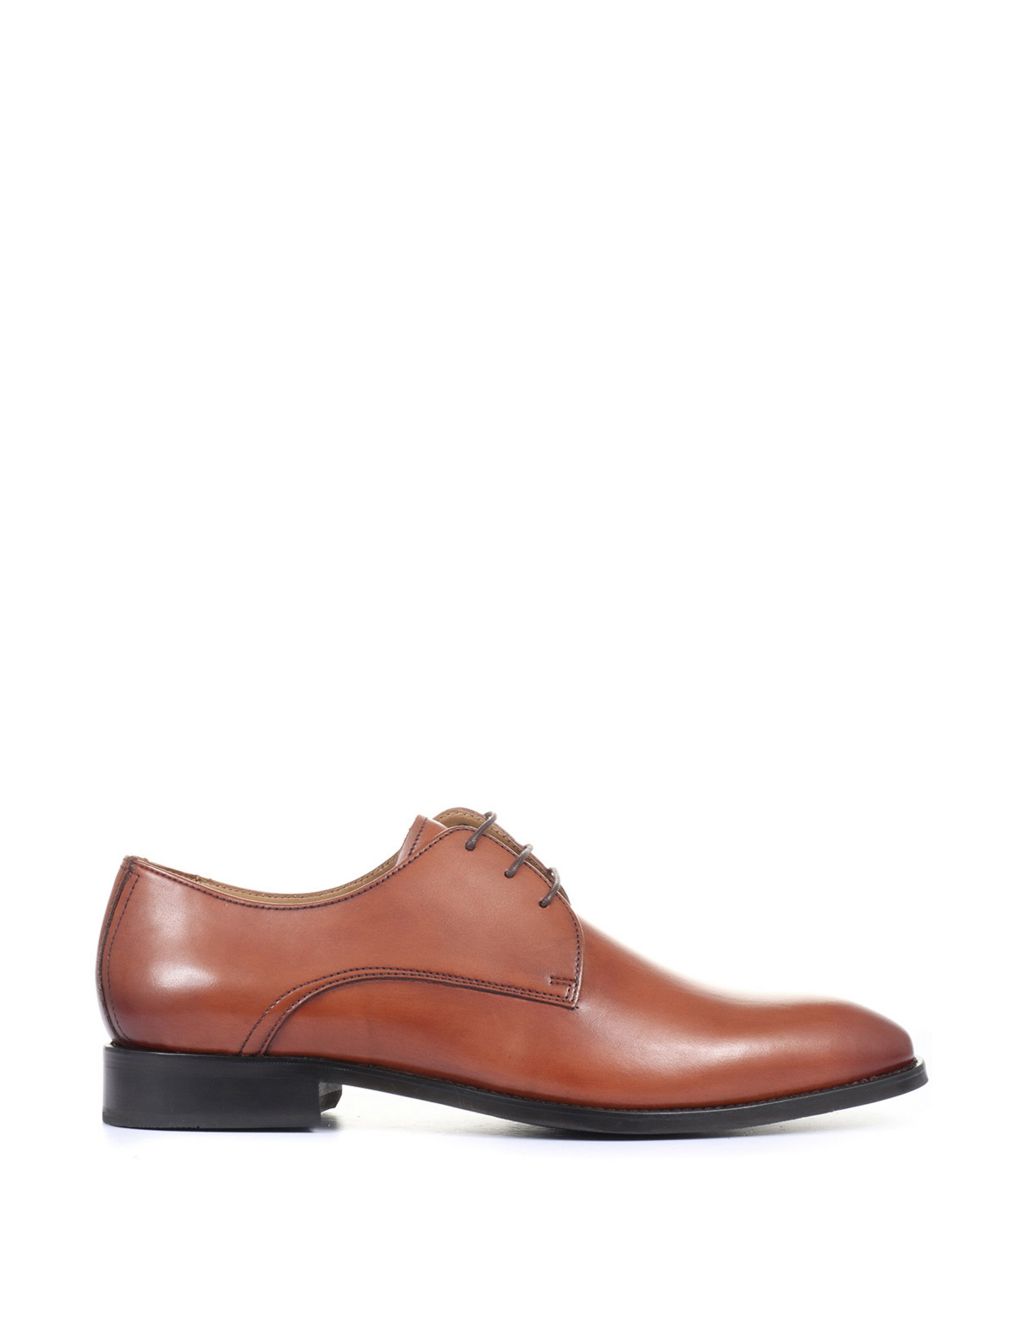 Leather Derby Shoe image 2